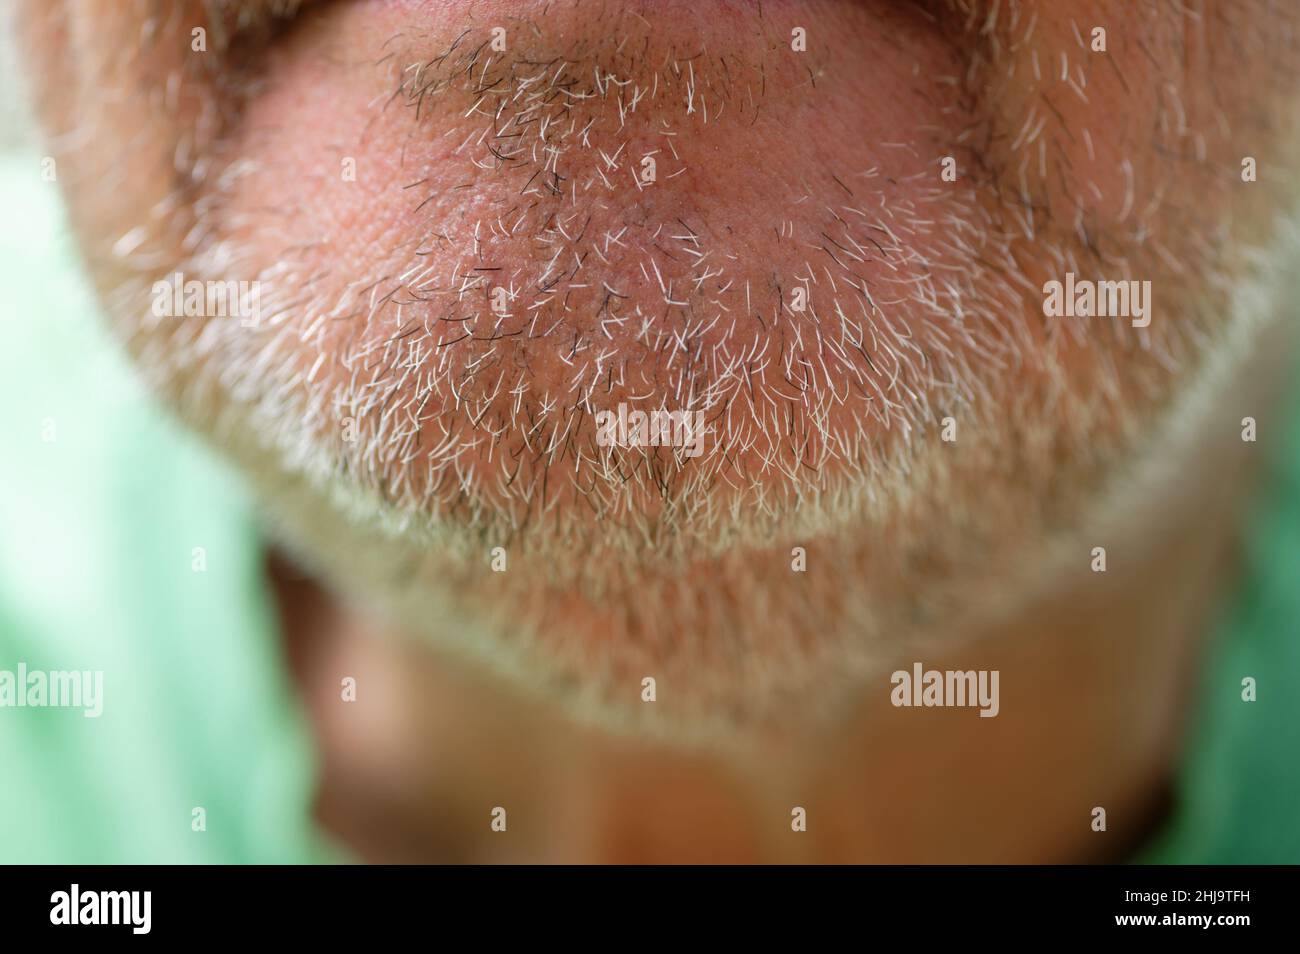 A close up photo of a man's chin. His black and white stubble is showing. Stock Photo